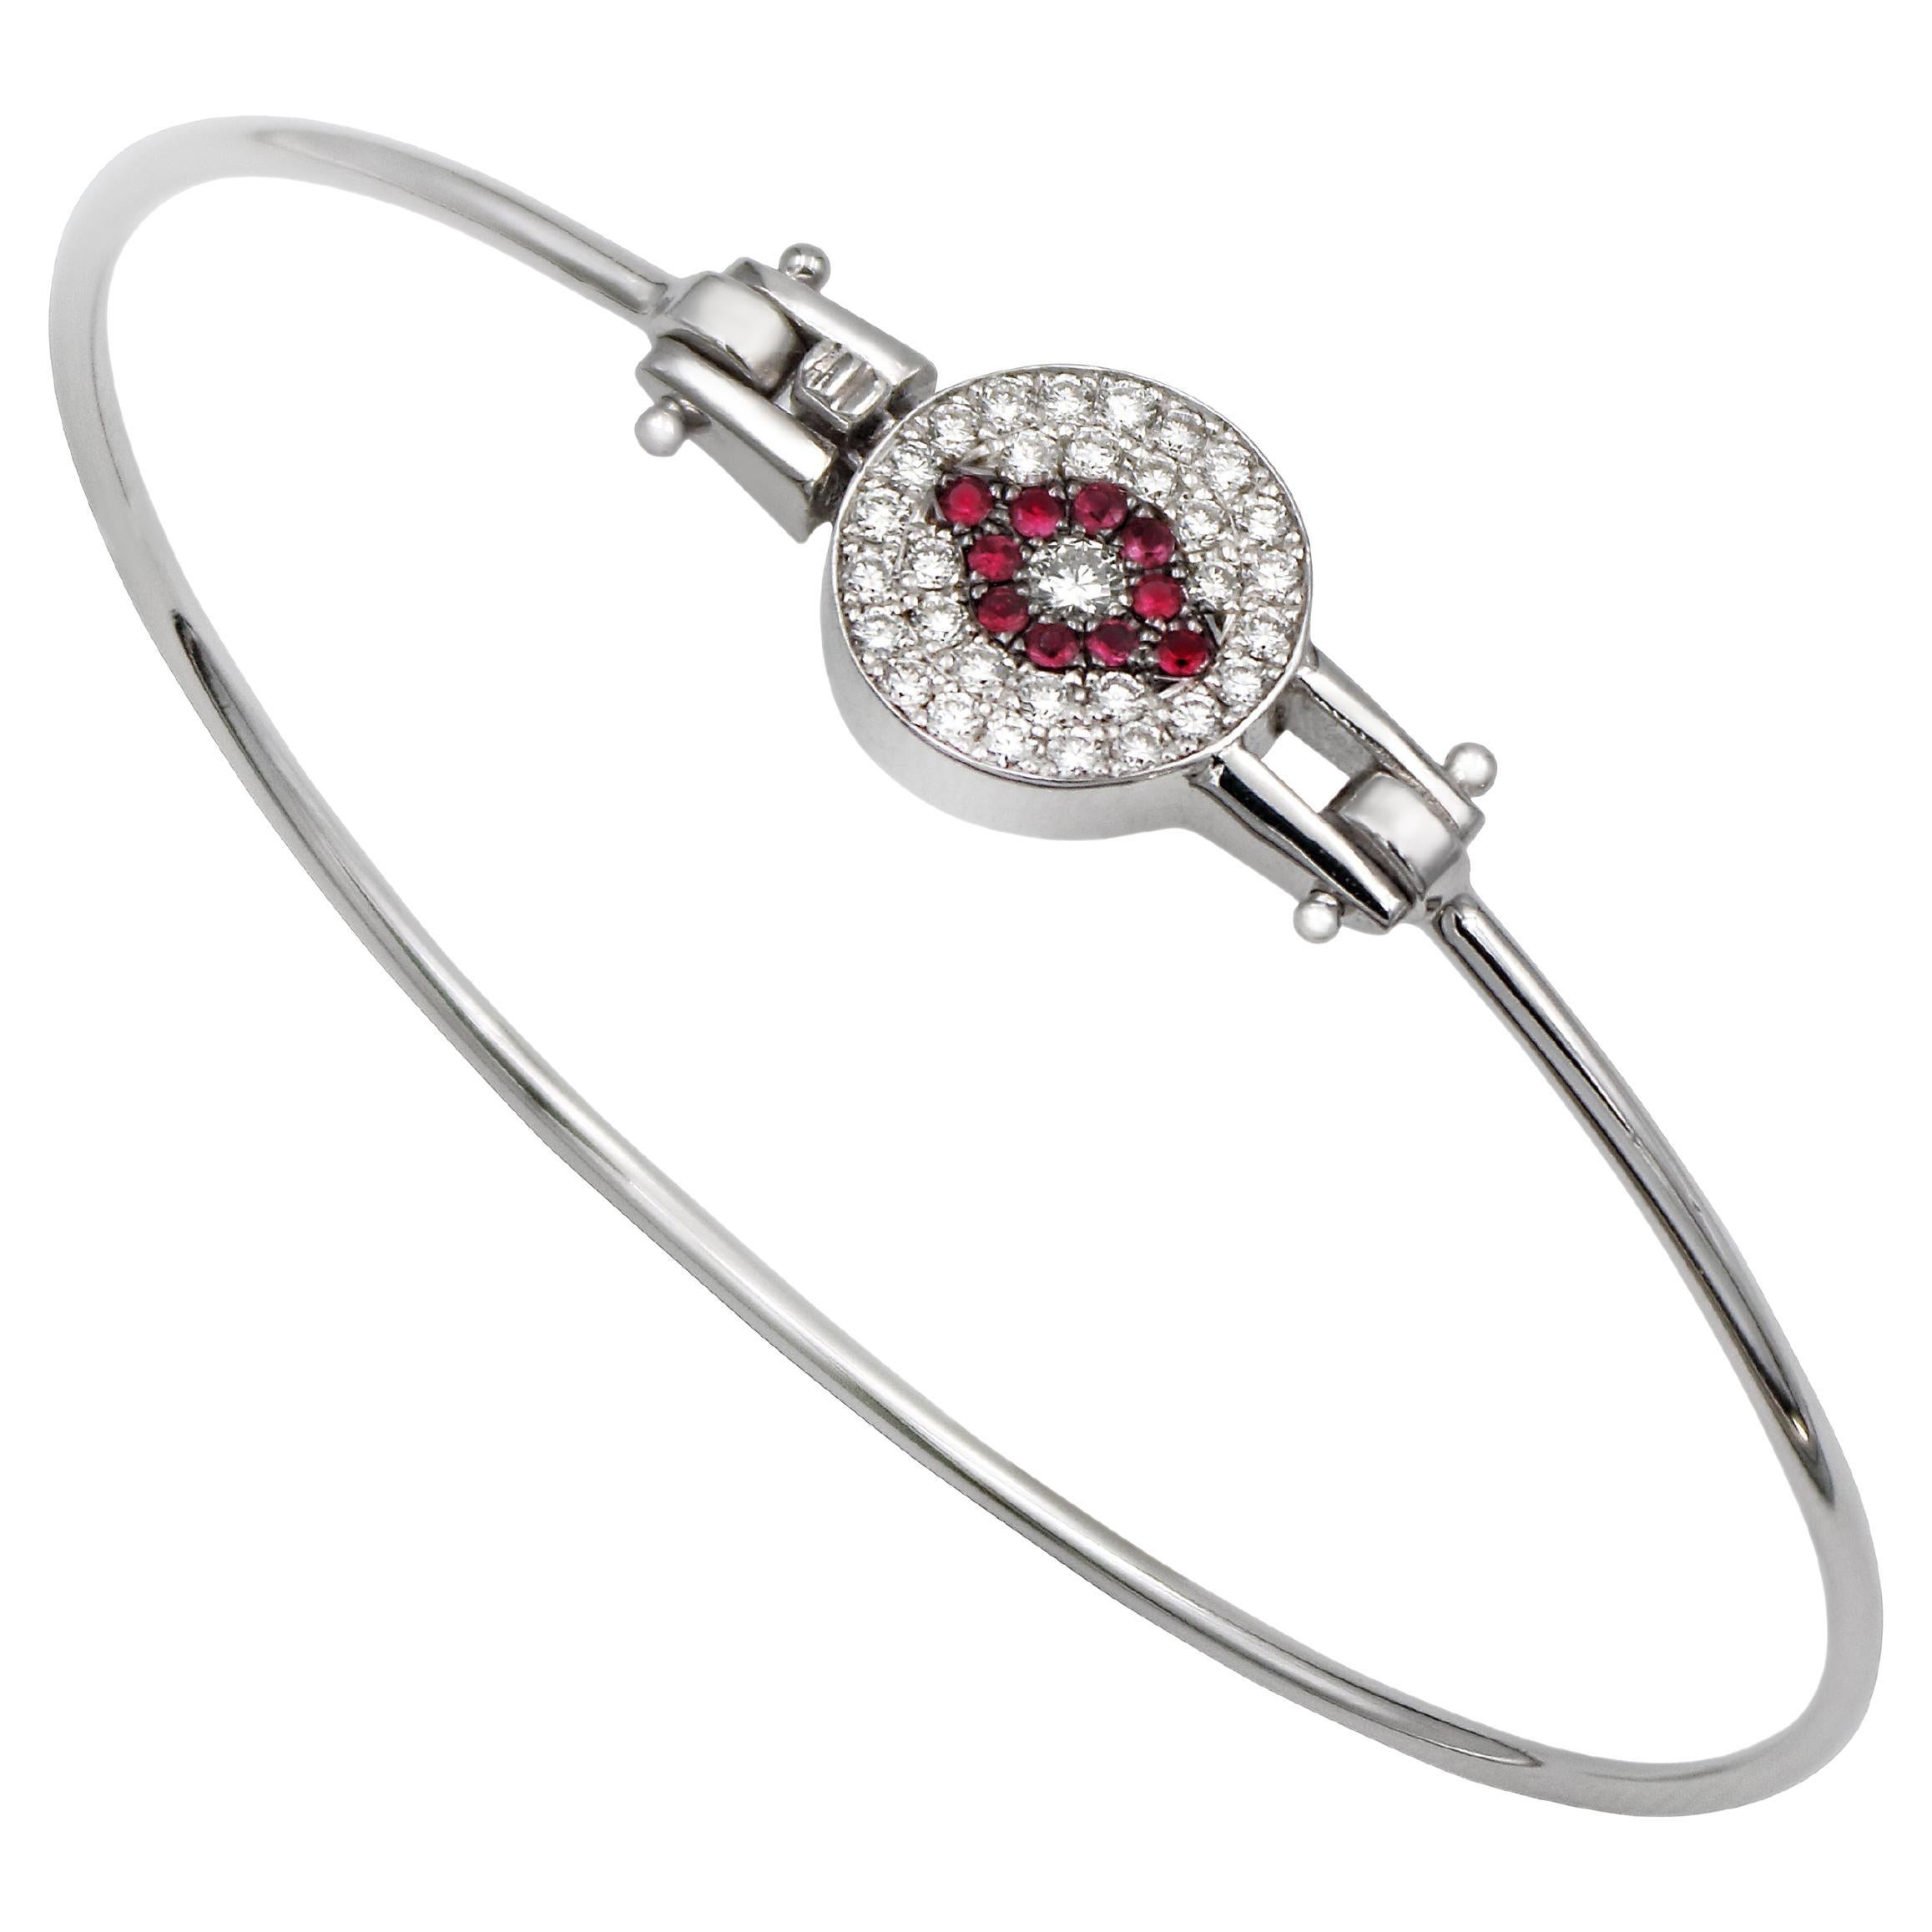 Dimos 18k White Gold Evil Eye Bangle Bracelet with Rubies and Diamonds For Sale